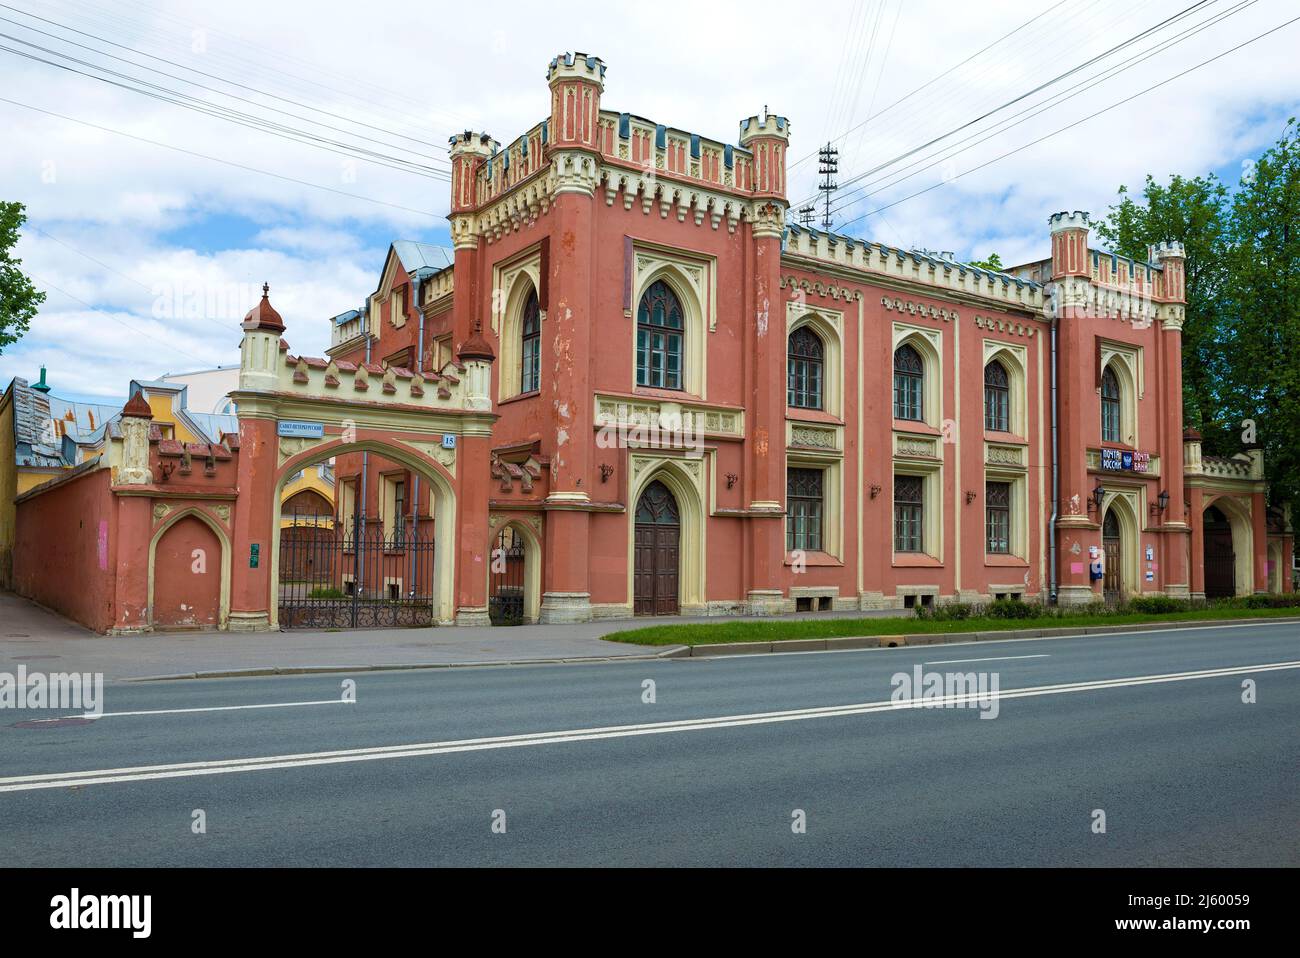 PETRODVORETS, RUSSIA - MAY 29, 2021: The ancient building of the city post office (1854) on a cloudy May day. Peterhof Stock Photo